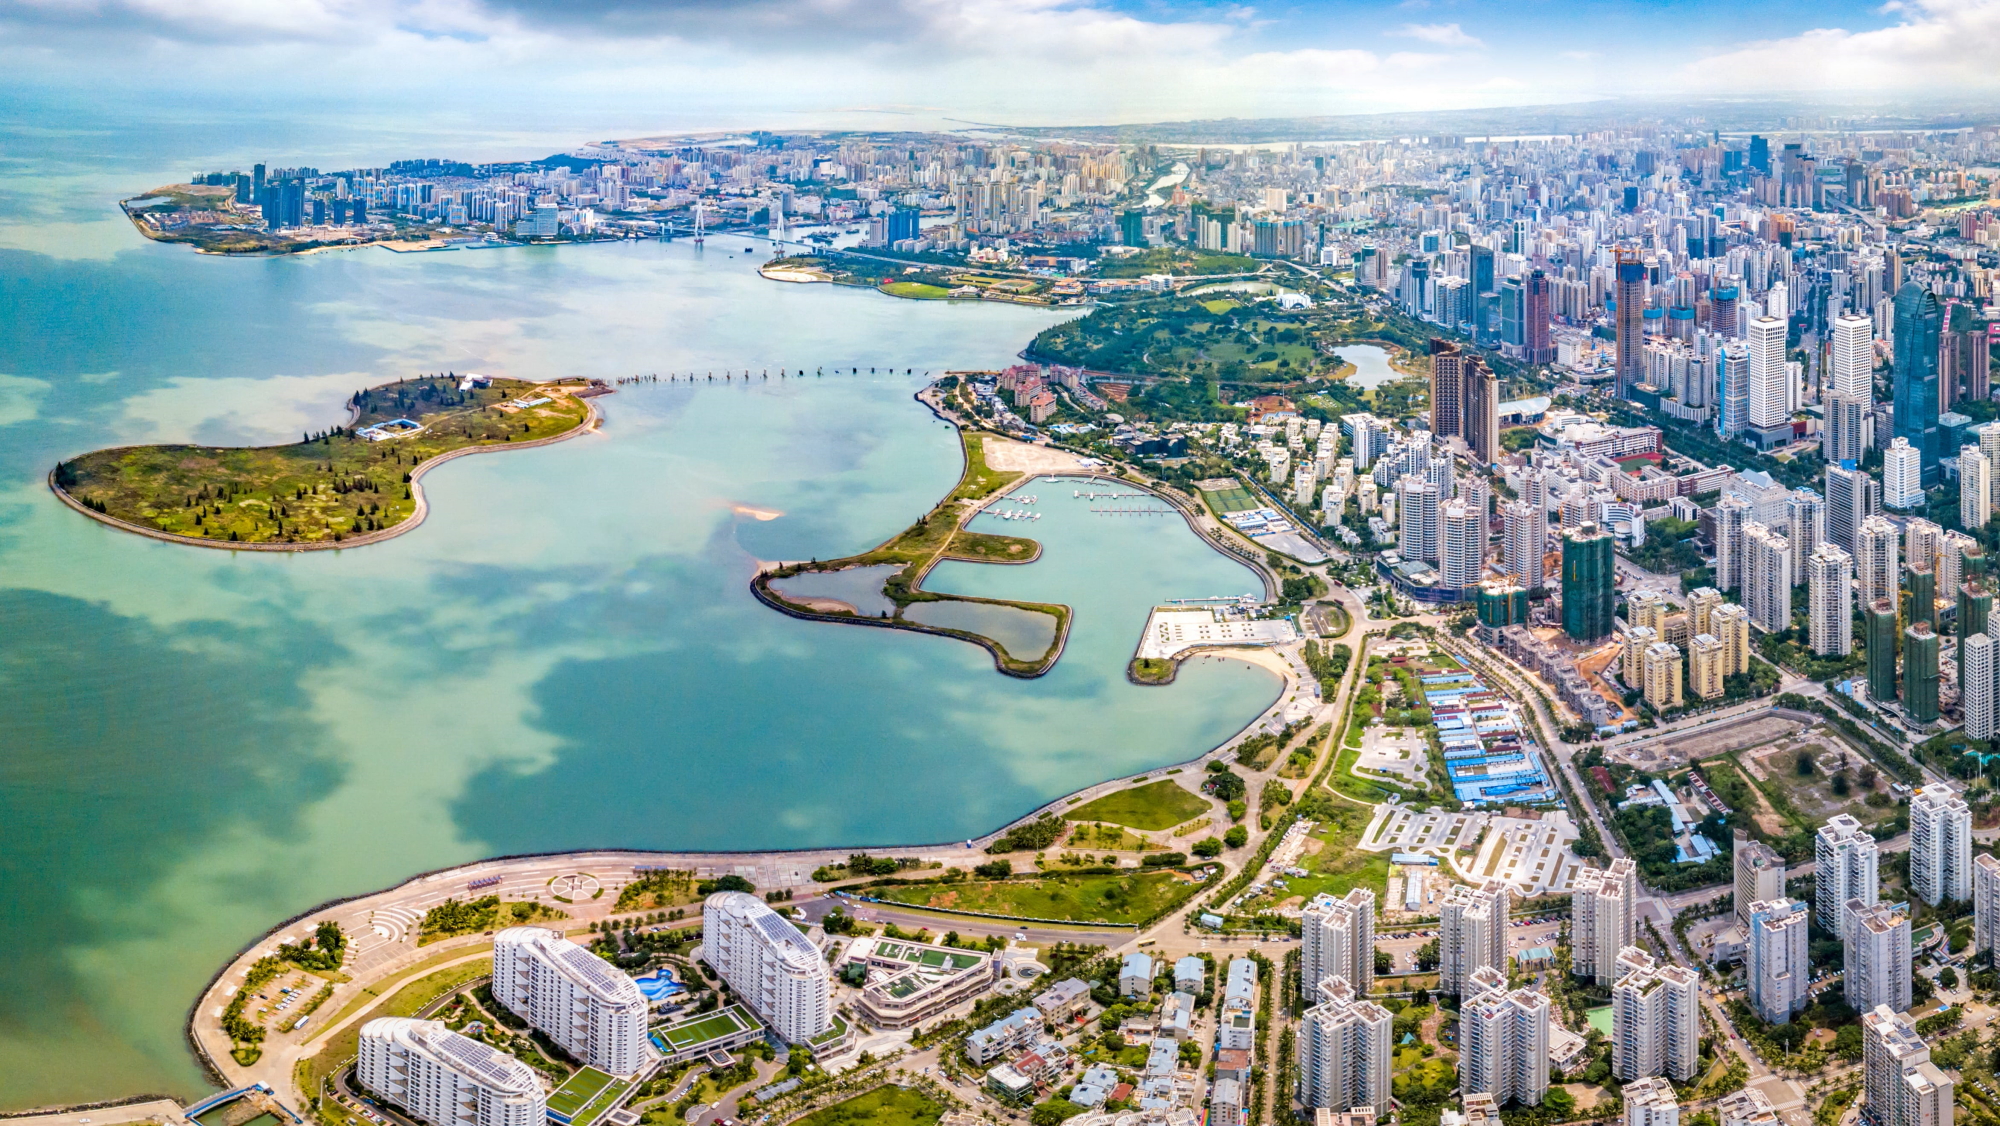 Radisson has signed a deal to expand its Radisson Blu brand to Hainan, China. The new-build Radisson Blu Haikou hotel, will be located in a Free Trade Zone to be established by the Chinese government in the thriving island province of Hainan. Developed by Hainan Daye Industry Co., Ltd, the 48-storey Radisson Blu Haikou will offer uninterrupted views of the sea of Haikou Bay and is scheduled to open in Q2 2020. Click to enlarge.